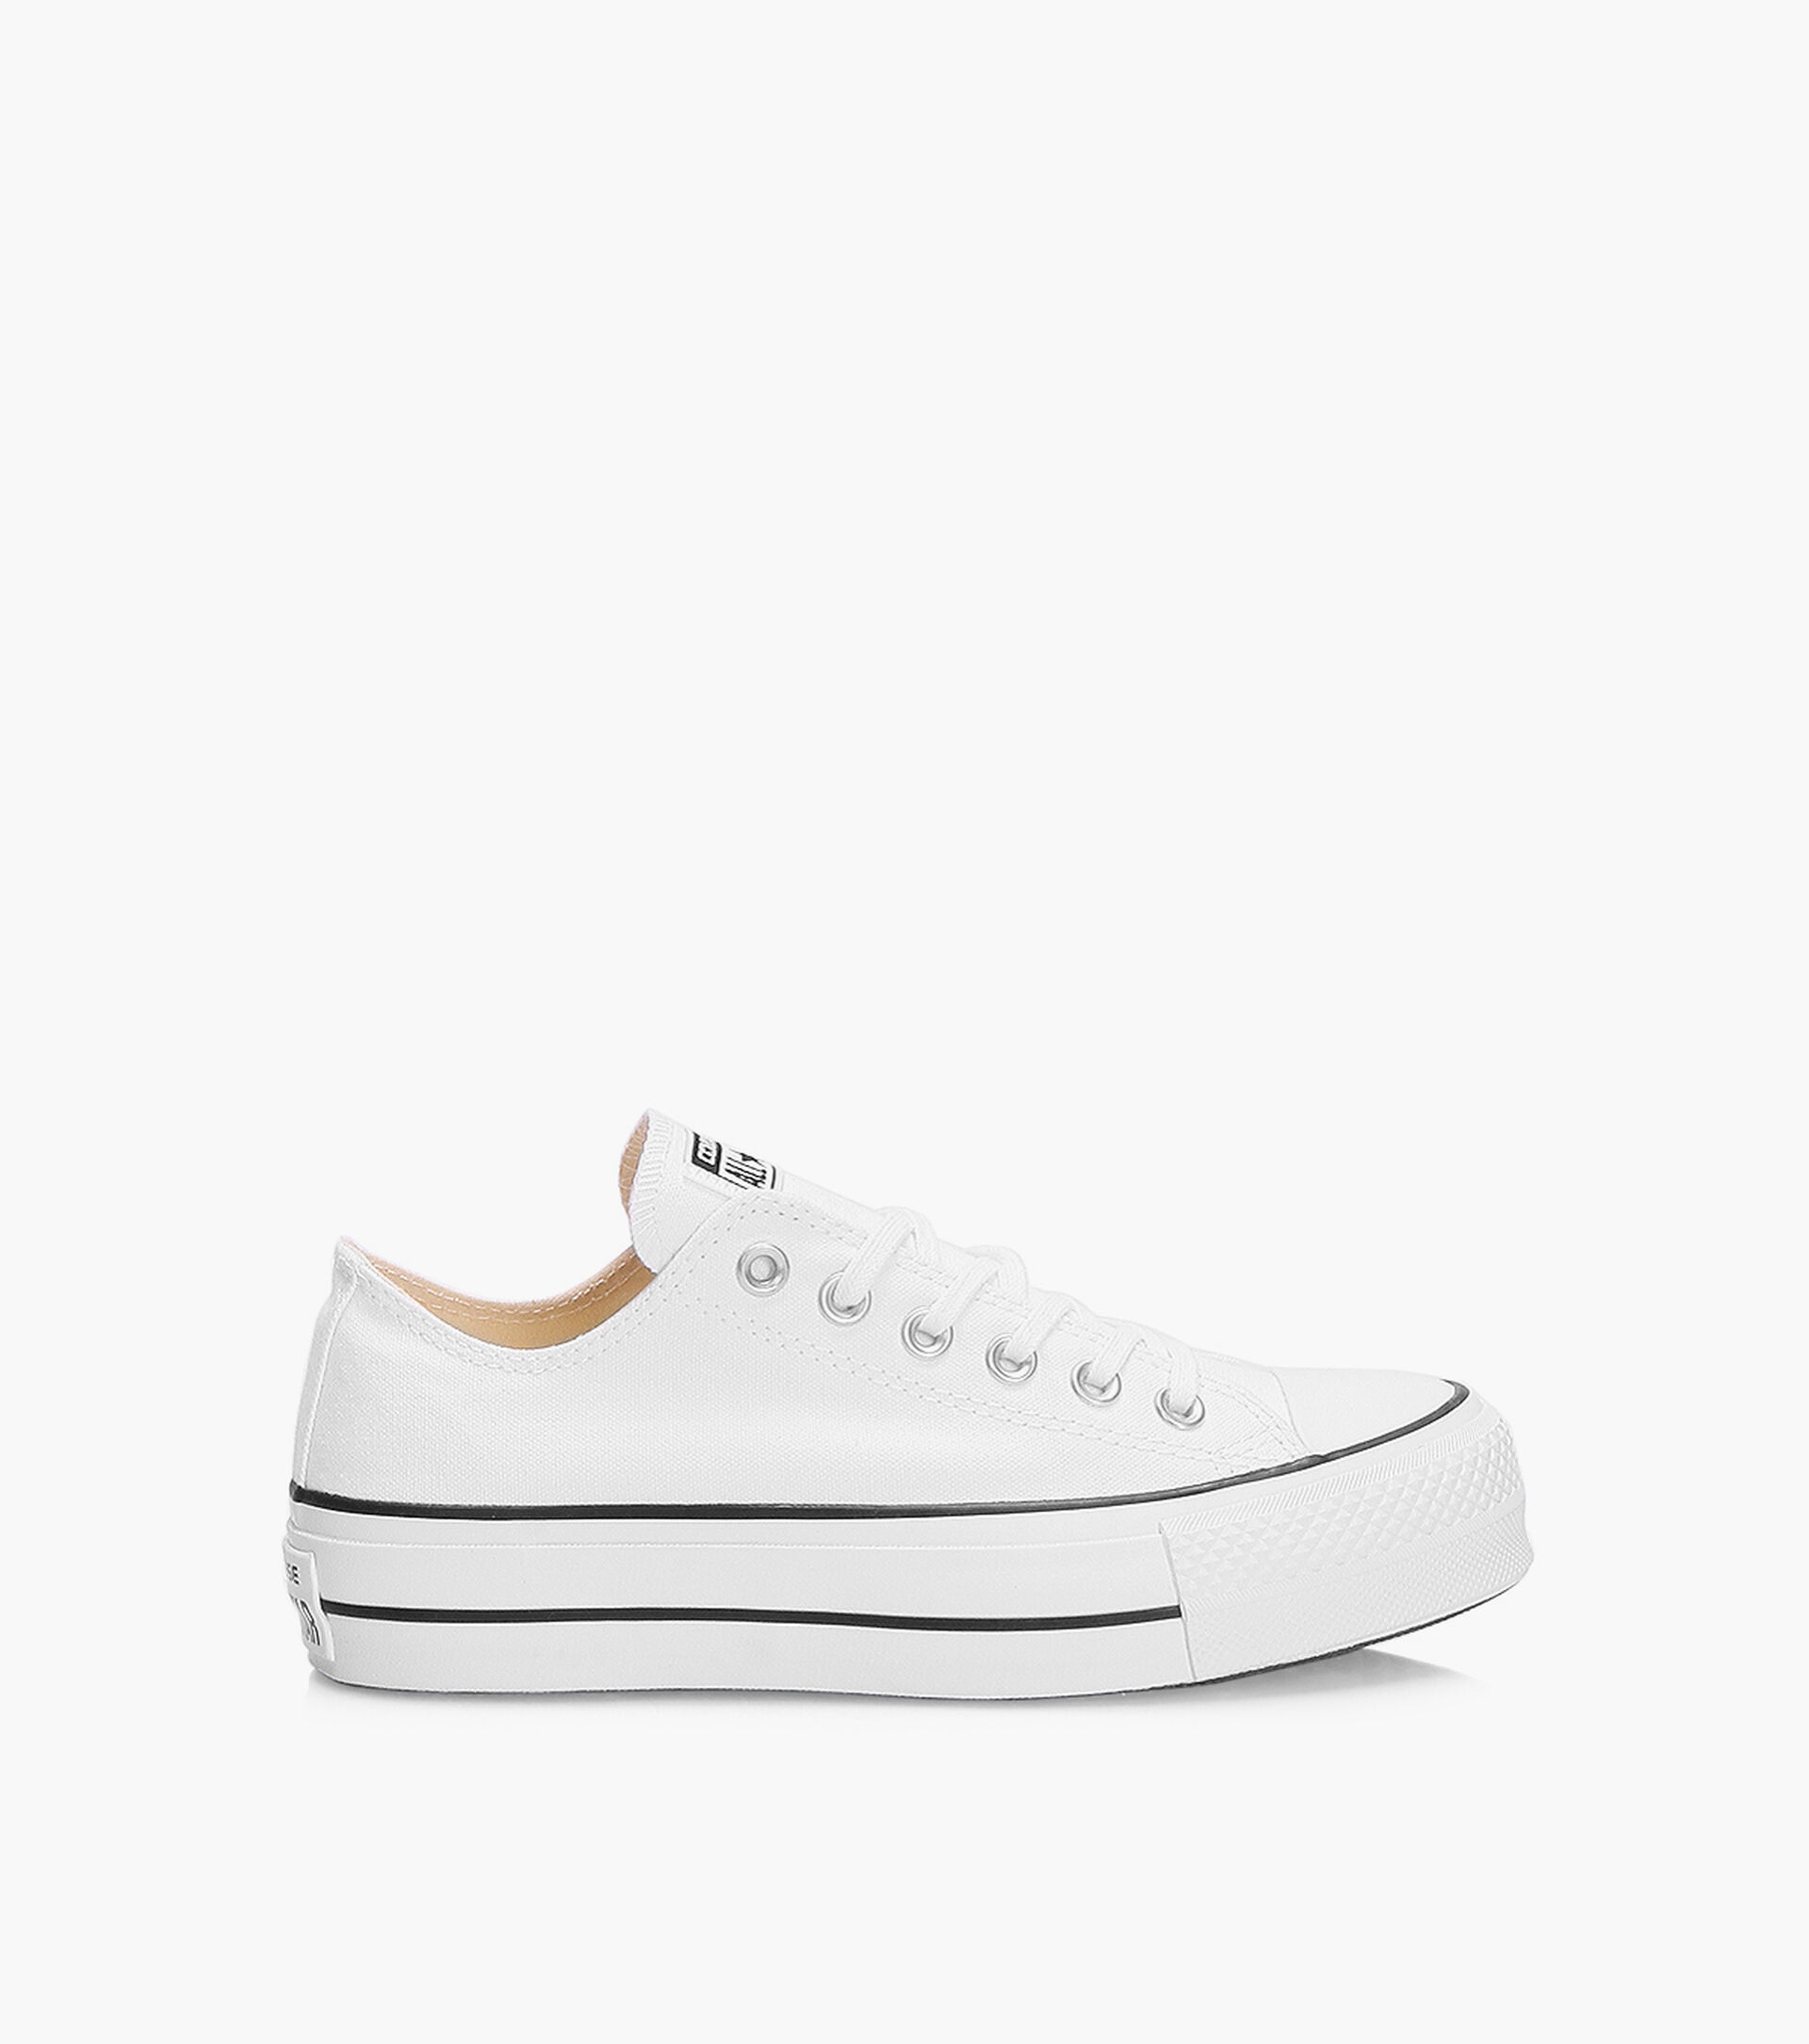 CONVERSE CHUCK TAYLOR ALL STAR LIFT LOW TOP - Fabric | Browns Shoes